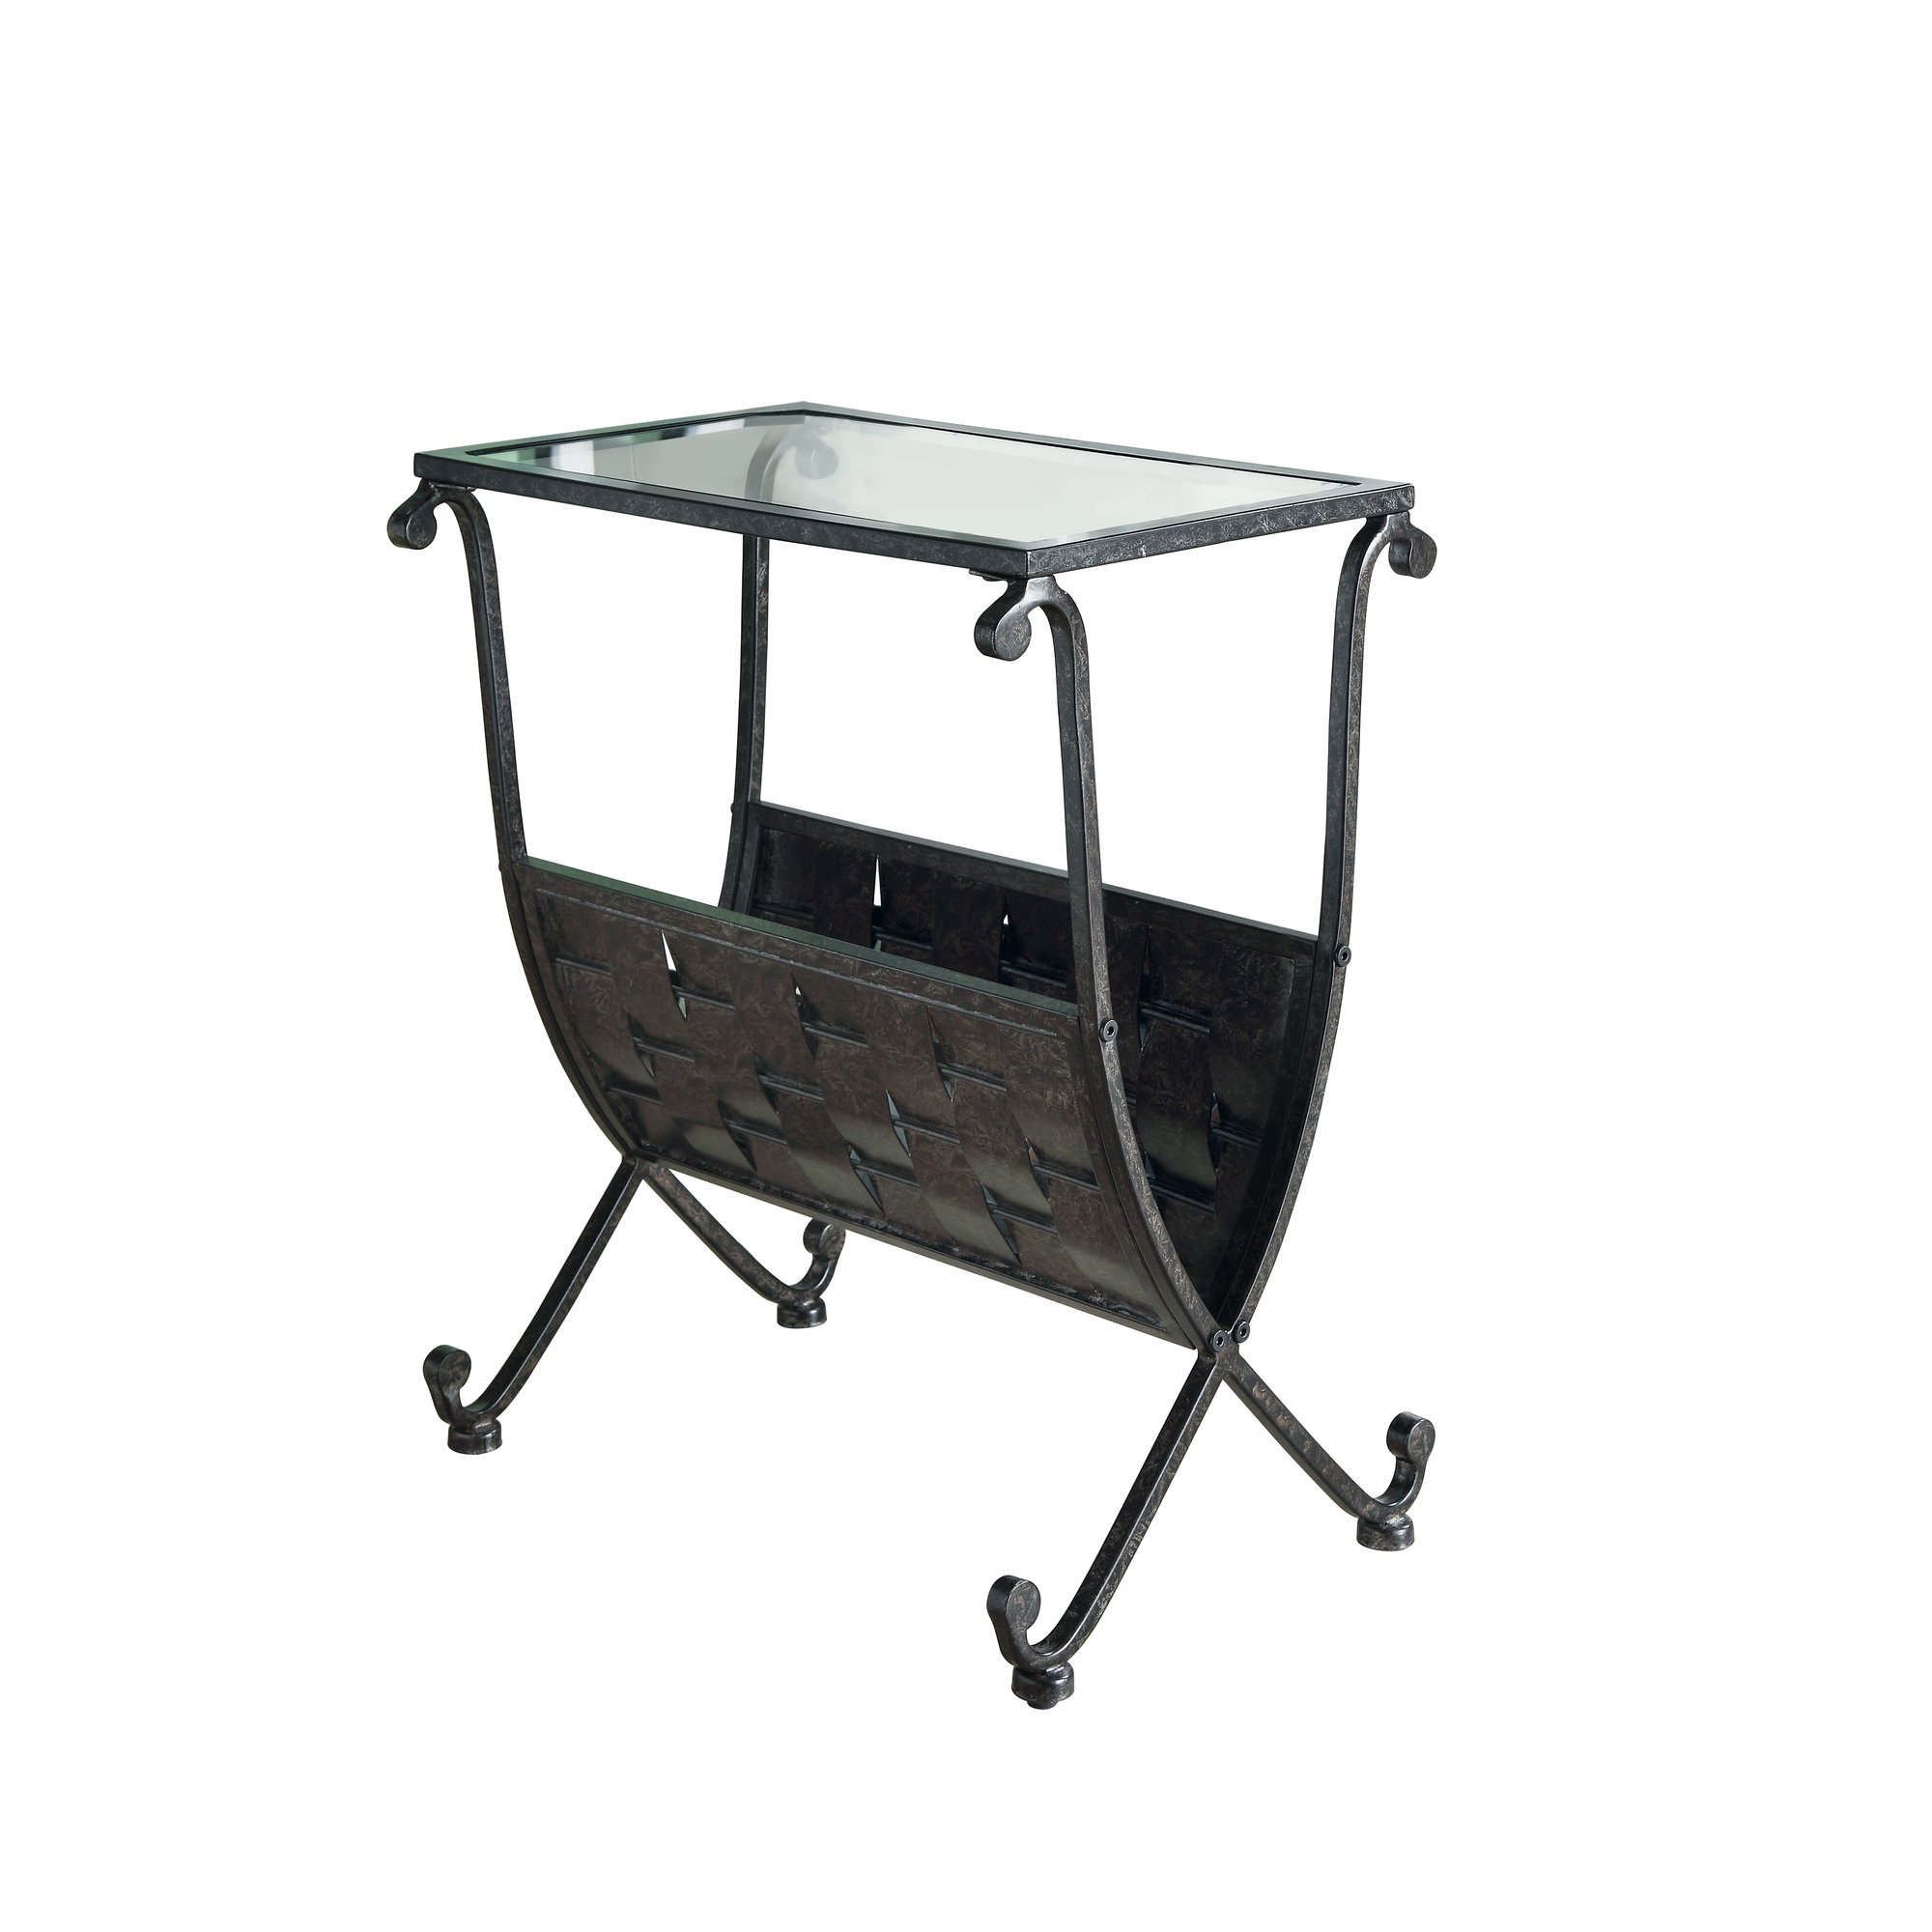 11.5" x 18.5" x 22" Black Taupe Metal Tempered Glass Accent Table